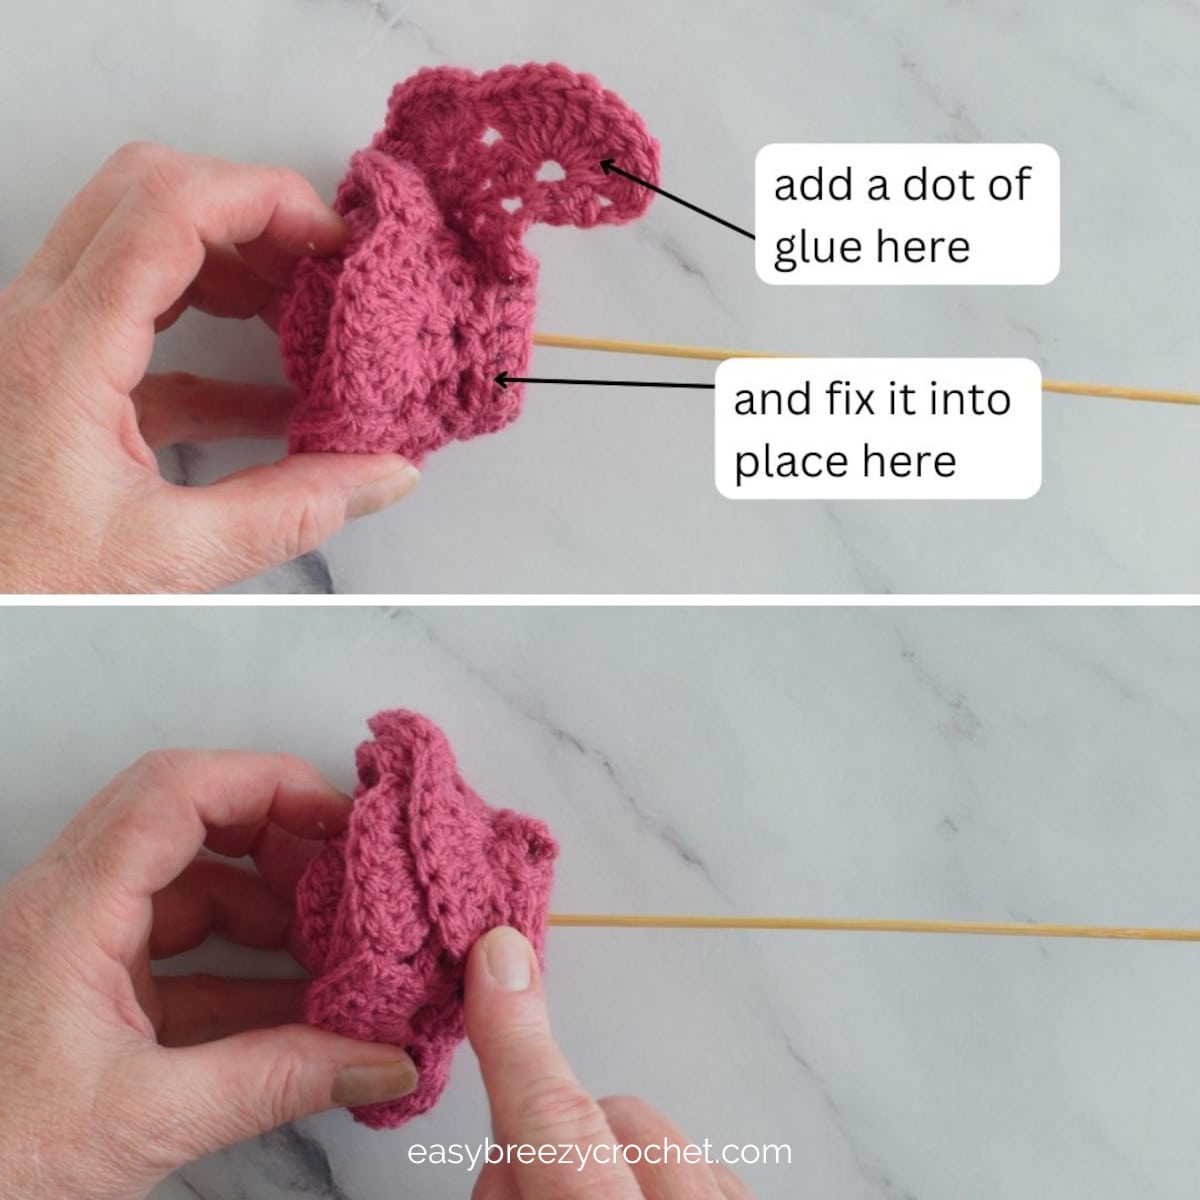 An image showing how to finish gluing a crochet rose flower.